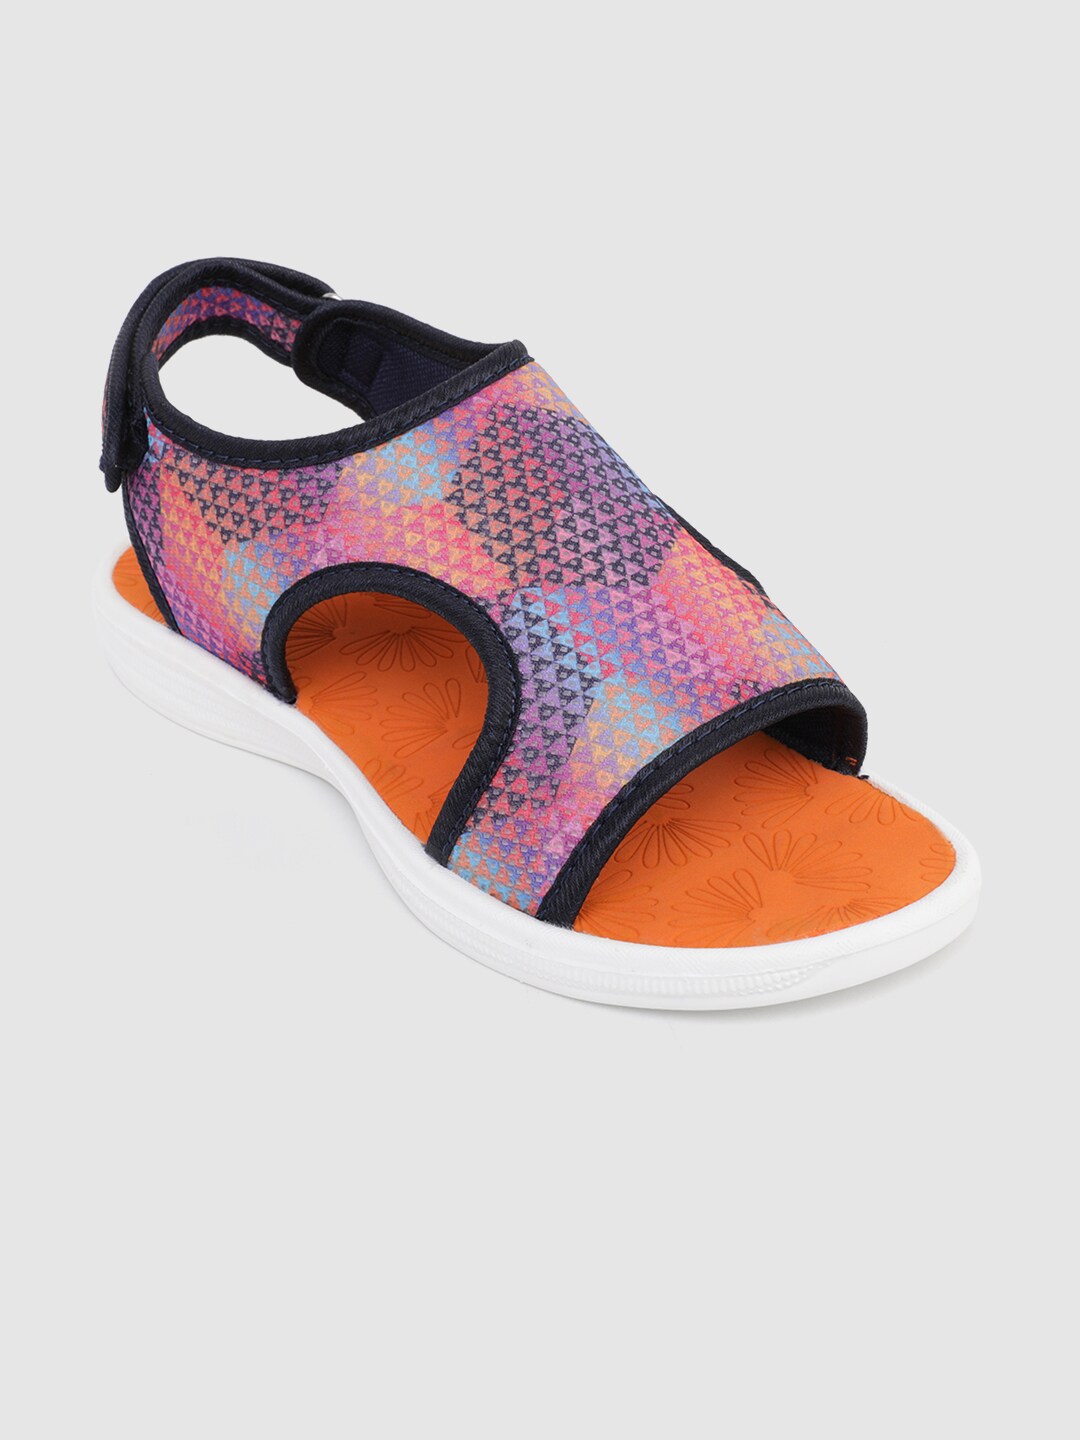 Kook N Keech Women Multicoloured Sports Sandals with Cut-Out Price in India